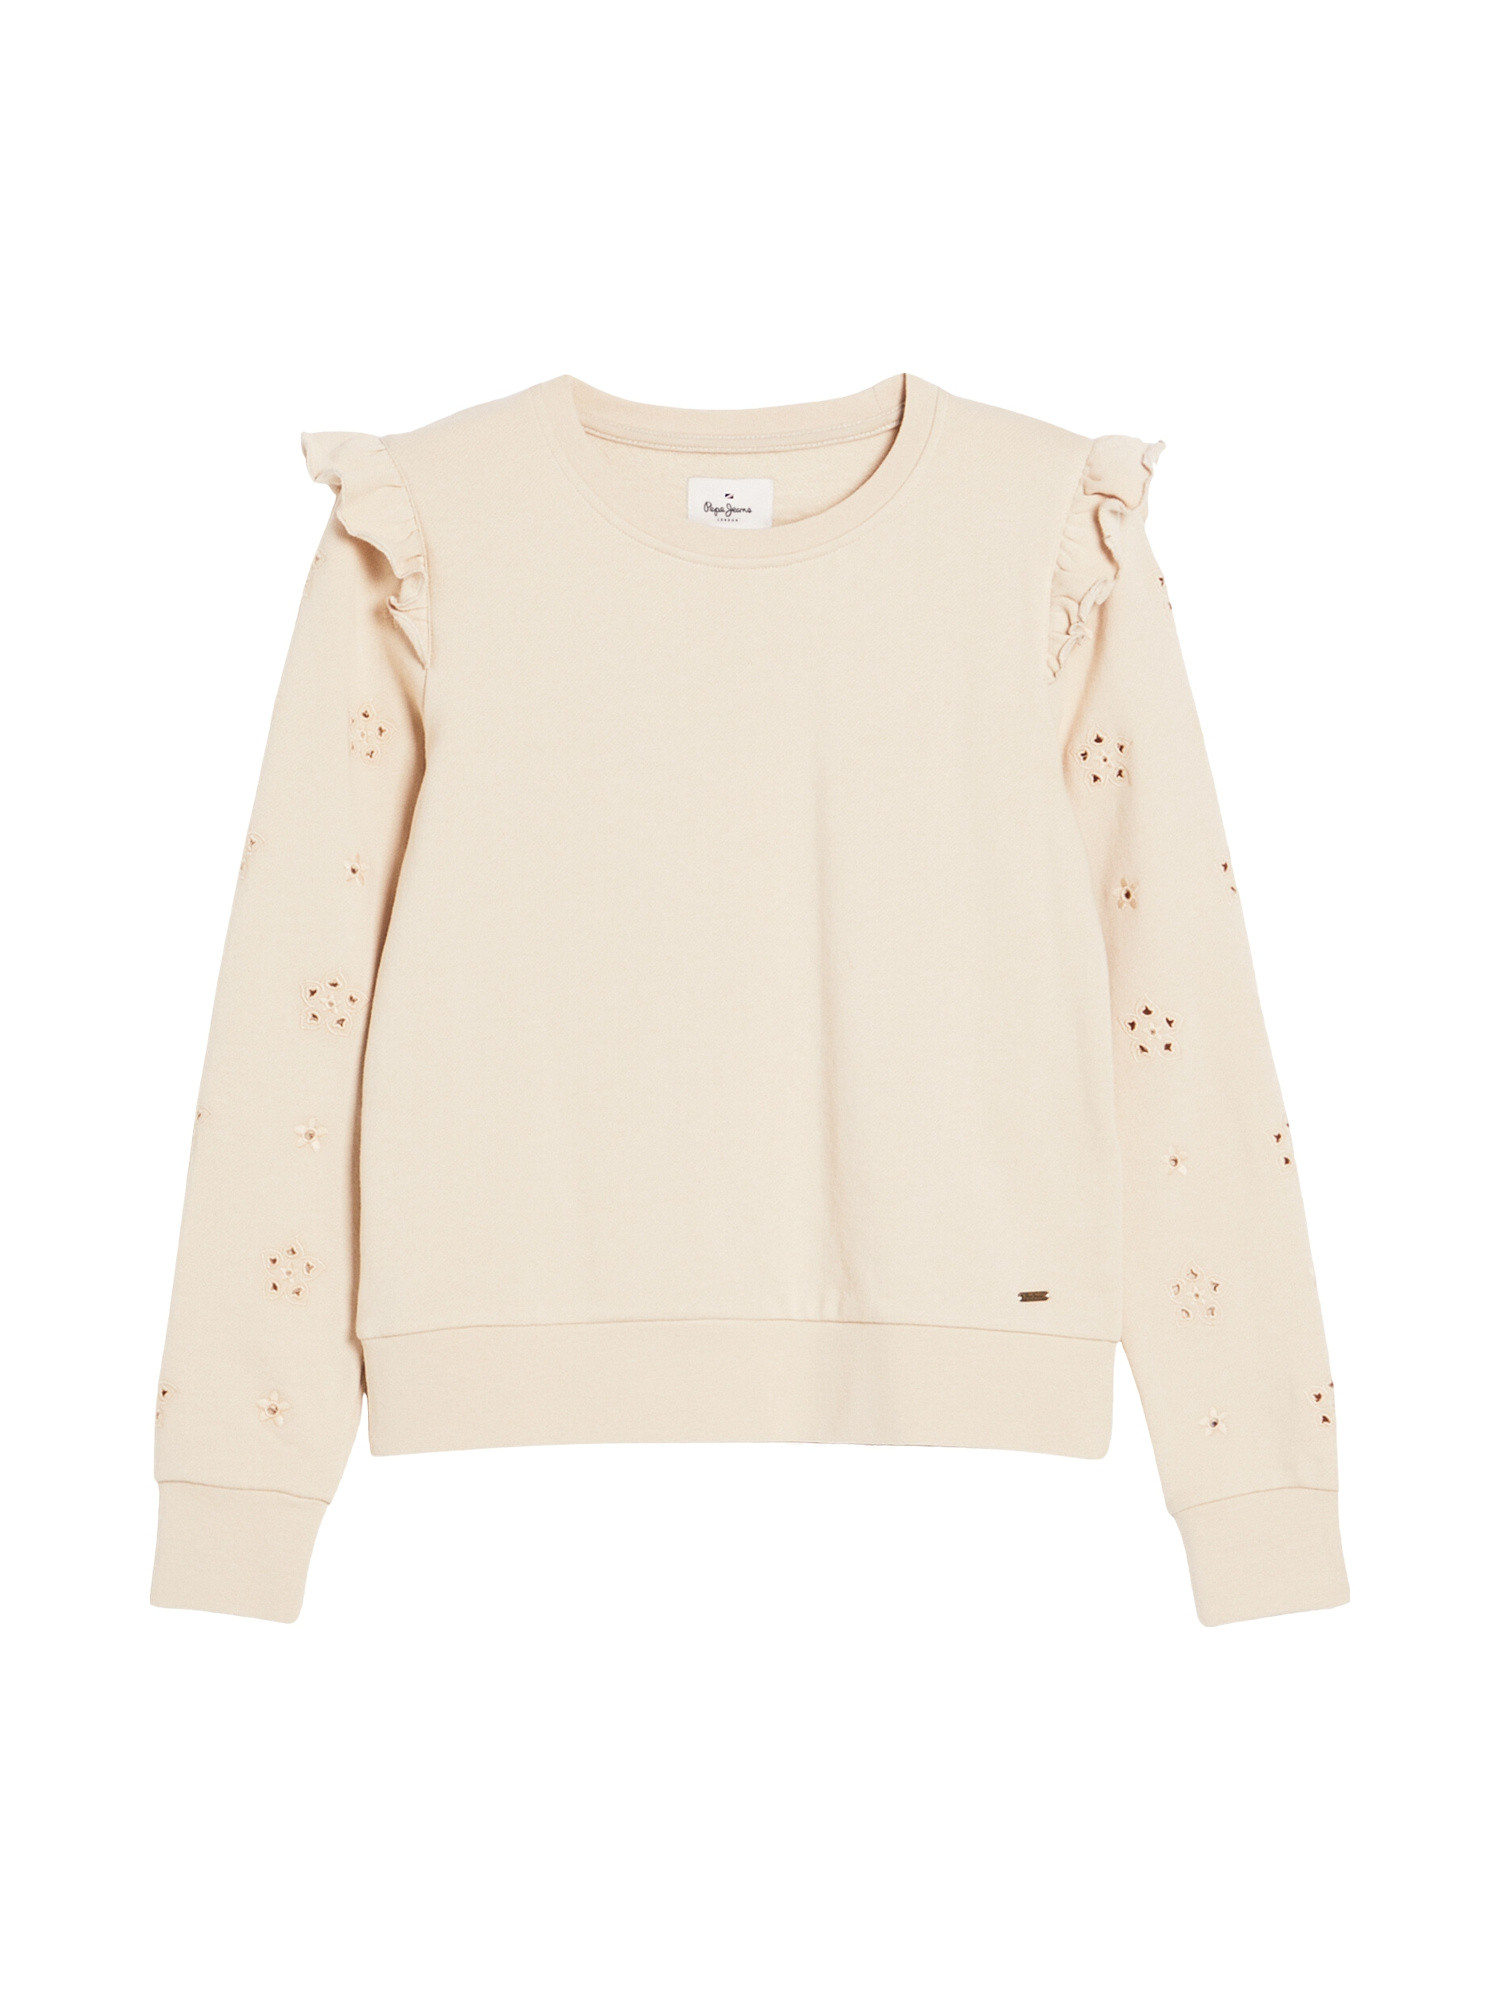 Pepe Jeans - Cotton sweatshirt with ruffles, Cream, large image number 0